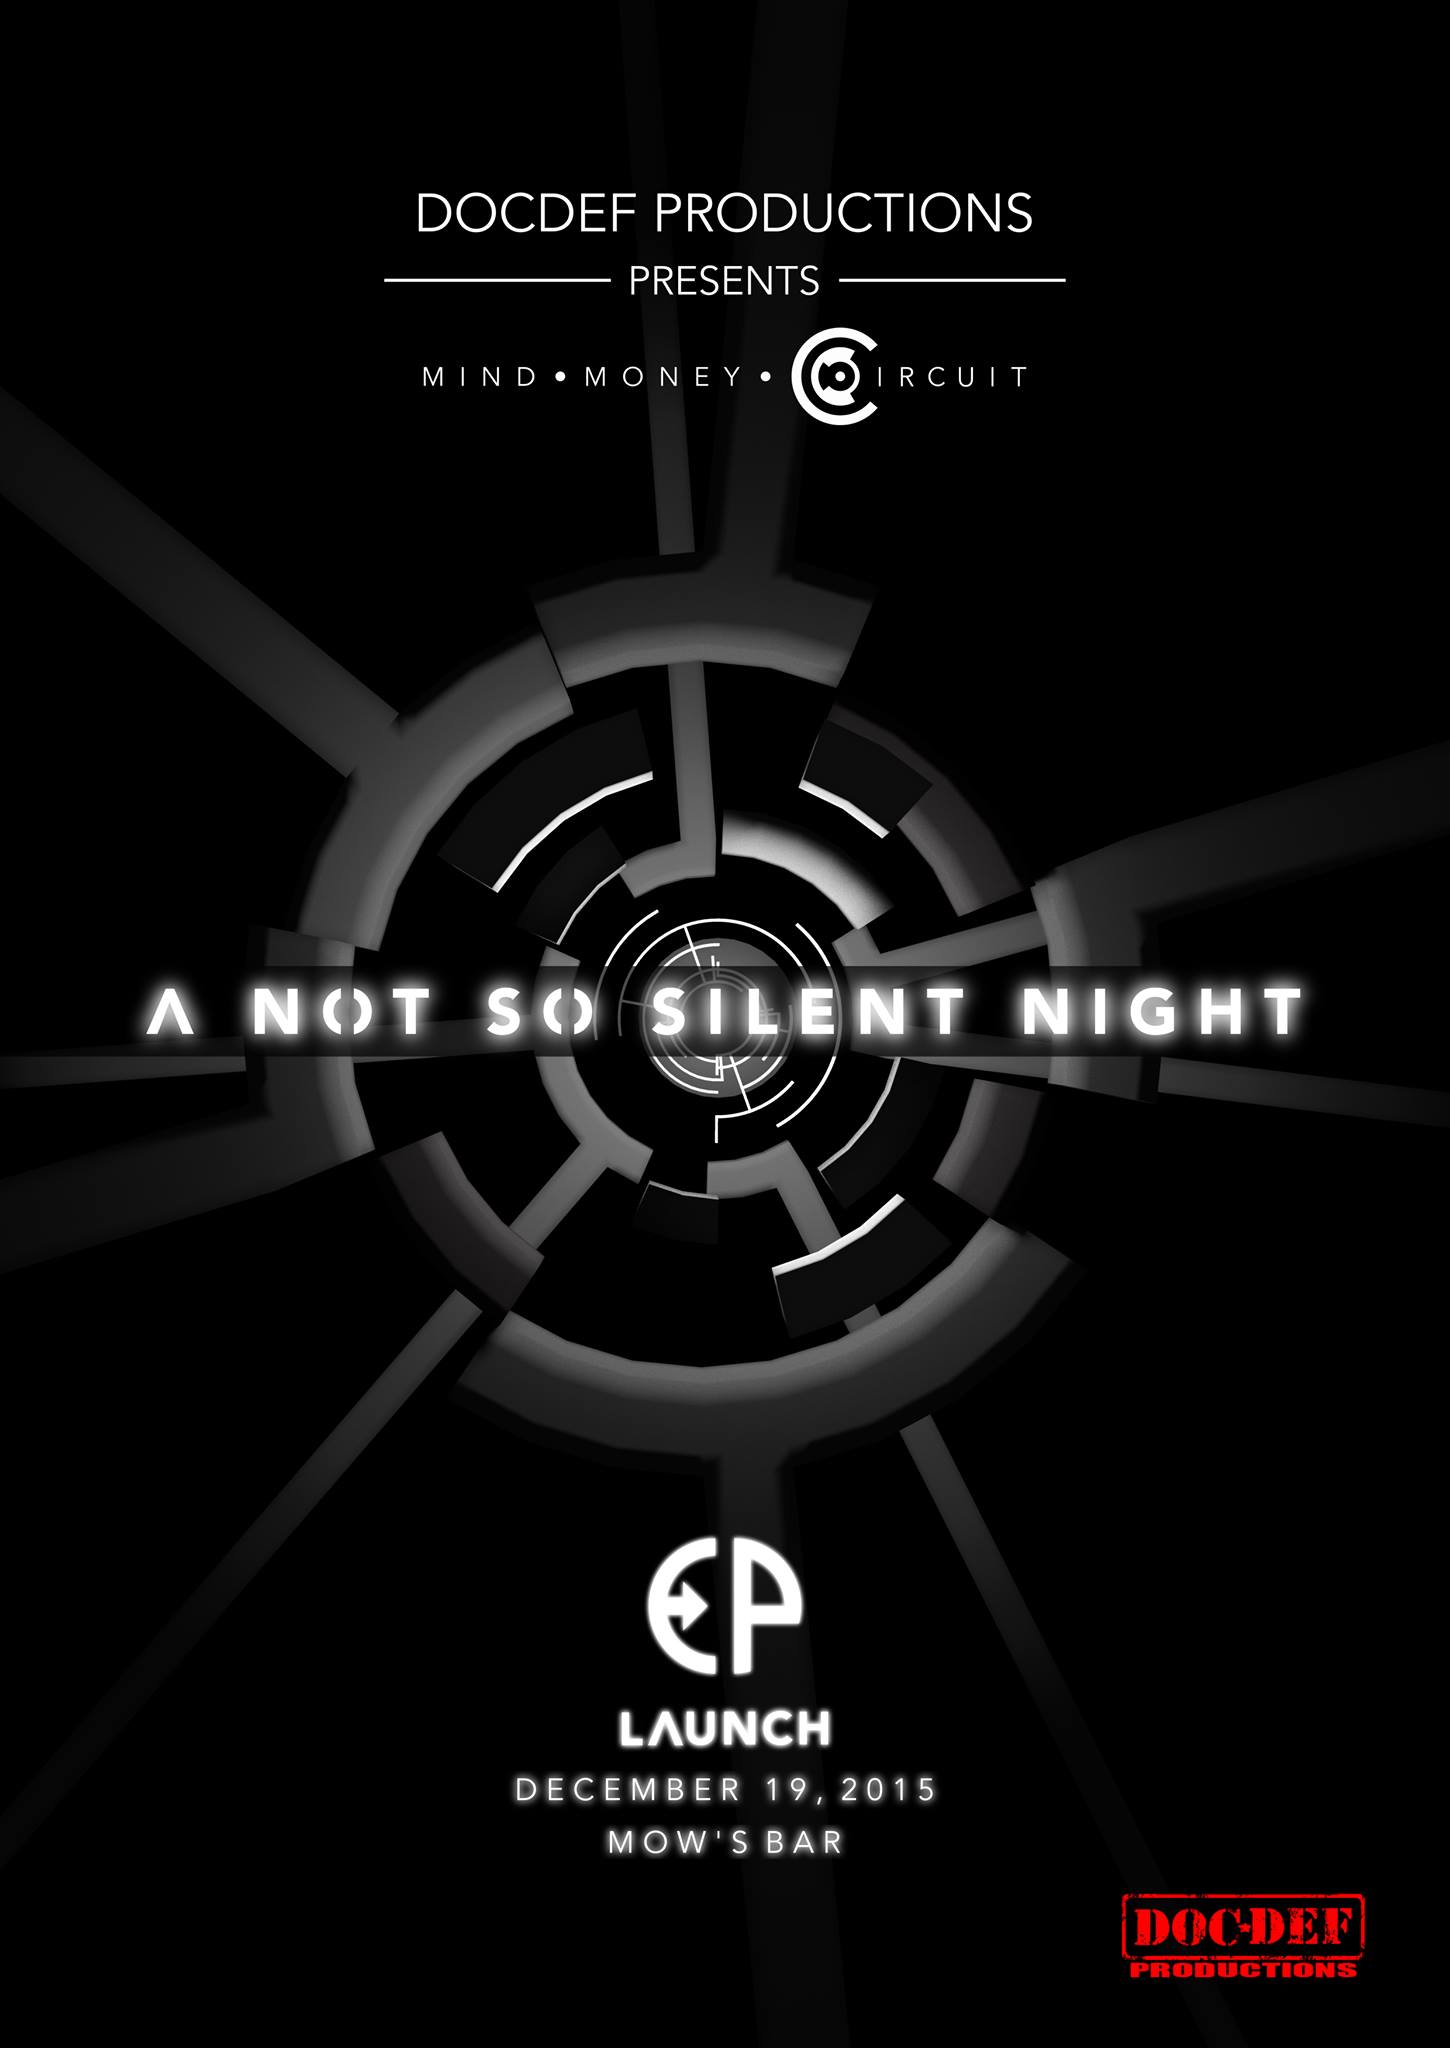 A Not So Silent Night: The Mind Money Circuit EP Launch clock Saturday, December 19 at 8:00pm pin Show Map Mow's Kowloon House Basement, 20 Matalino St., 1100 Quezon City, Philippines It's been a year in the making. Now allow us to serenade you and warm up your cool December night. A Not So Silent Night: The Mind Money Circuit EP Launch 8:00 PM Saturday, December 19, 2015 Mow's Bar, Matalino St., Quezon City Save the date. ---- Heto na ang pinakahihintay natin. DocDef Productions presents A Not So Silent Night: The Mind Money Circuit EP Launch 8:00 PM Saturday, December 19, 2015 Mow's Bar, Matalino St., Quezon City **Keep an eye on our page for the unveiling of performers!** RSVP: bit.ly/pupuntaako Follow us: instagram.com/mindmoneycircuit